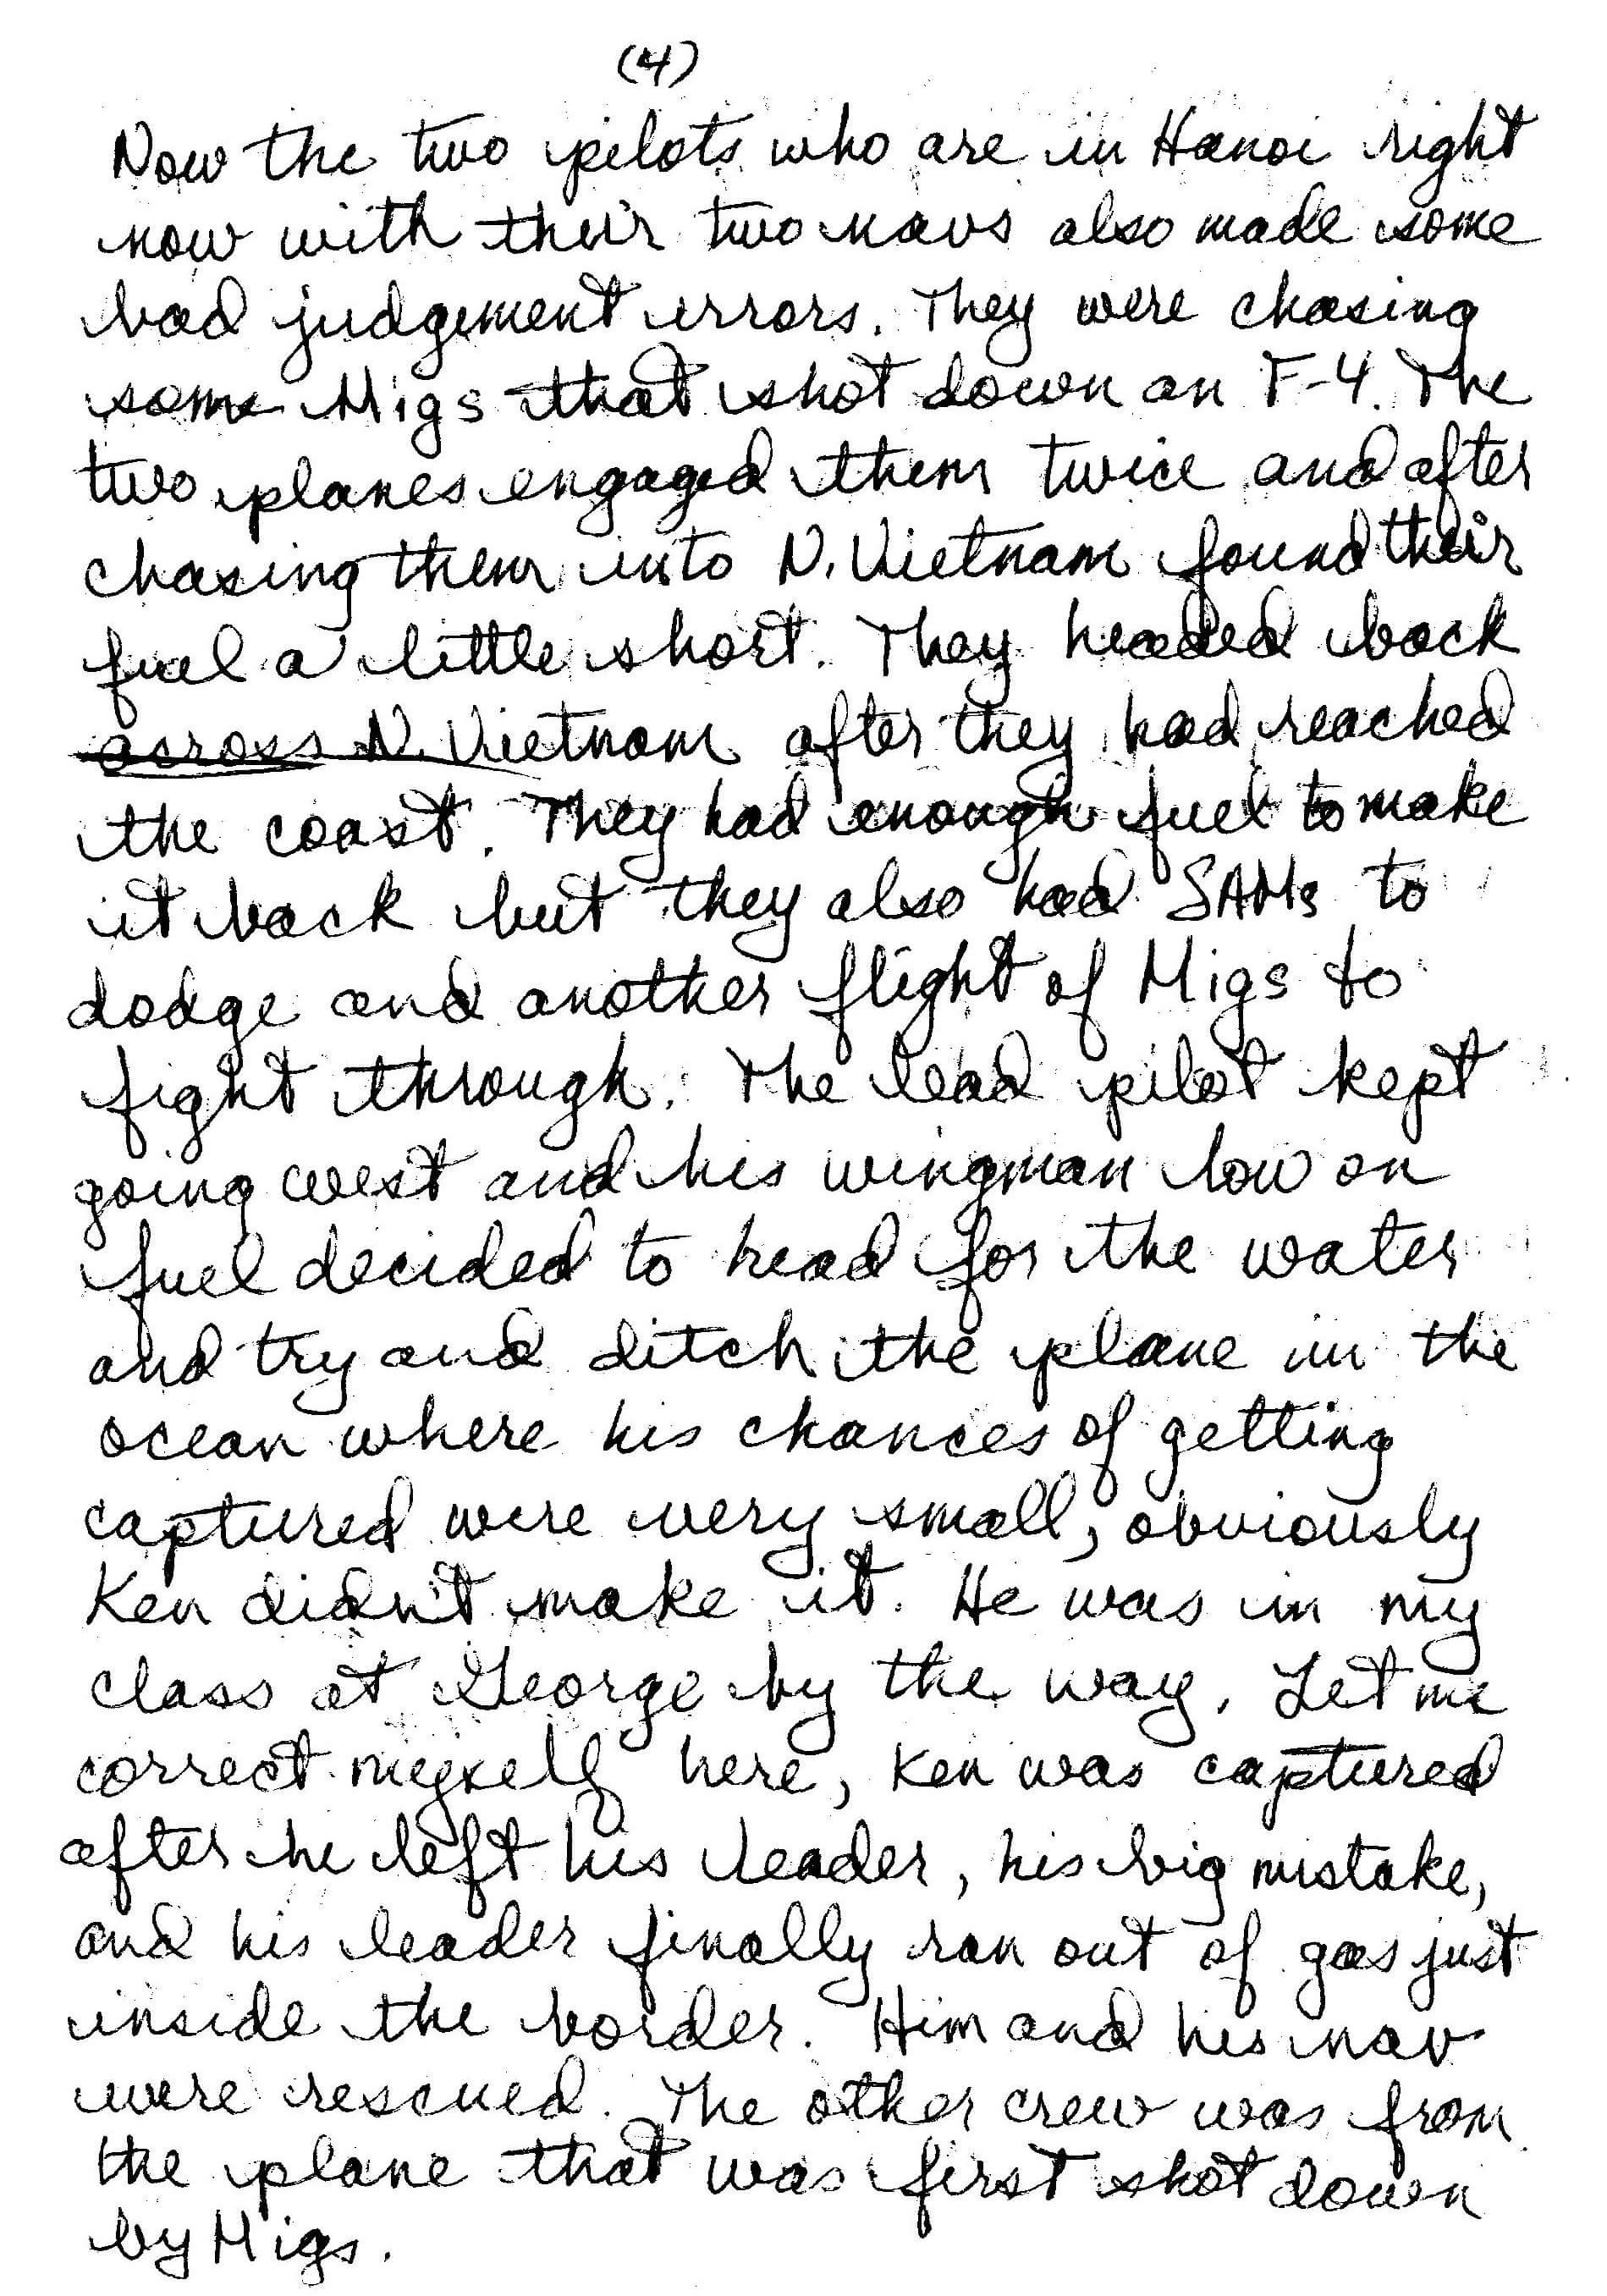 Page 4 of a letter home.